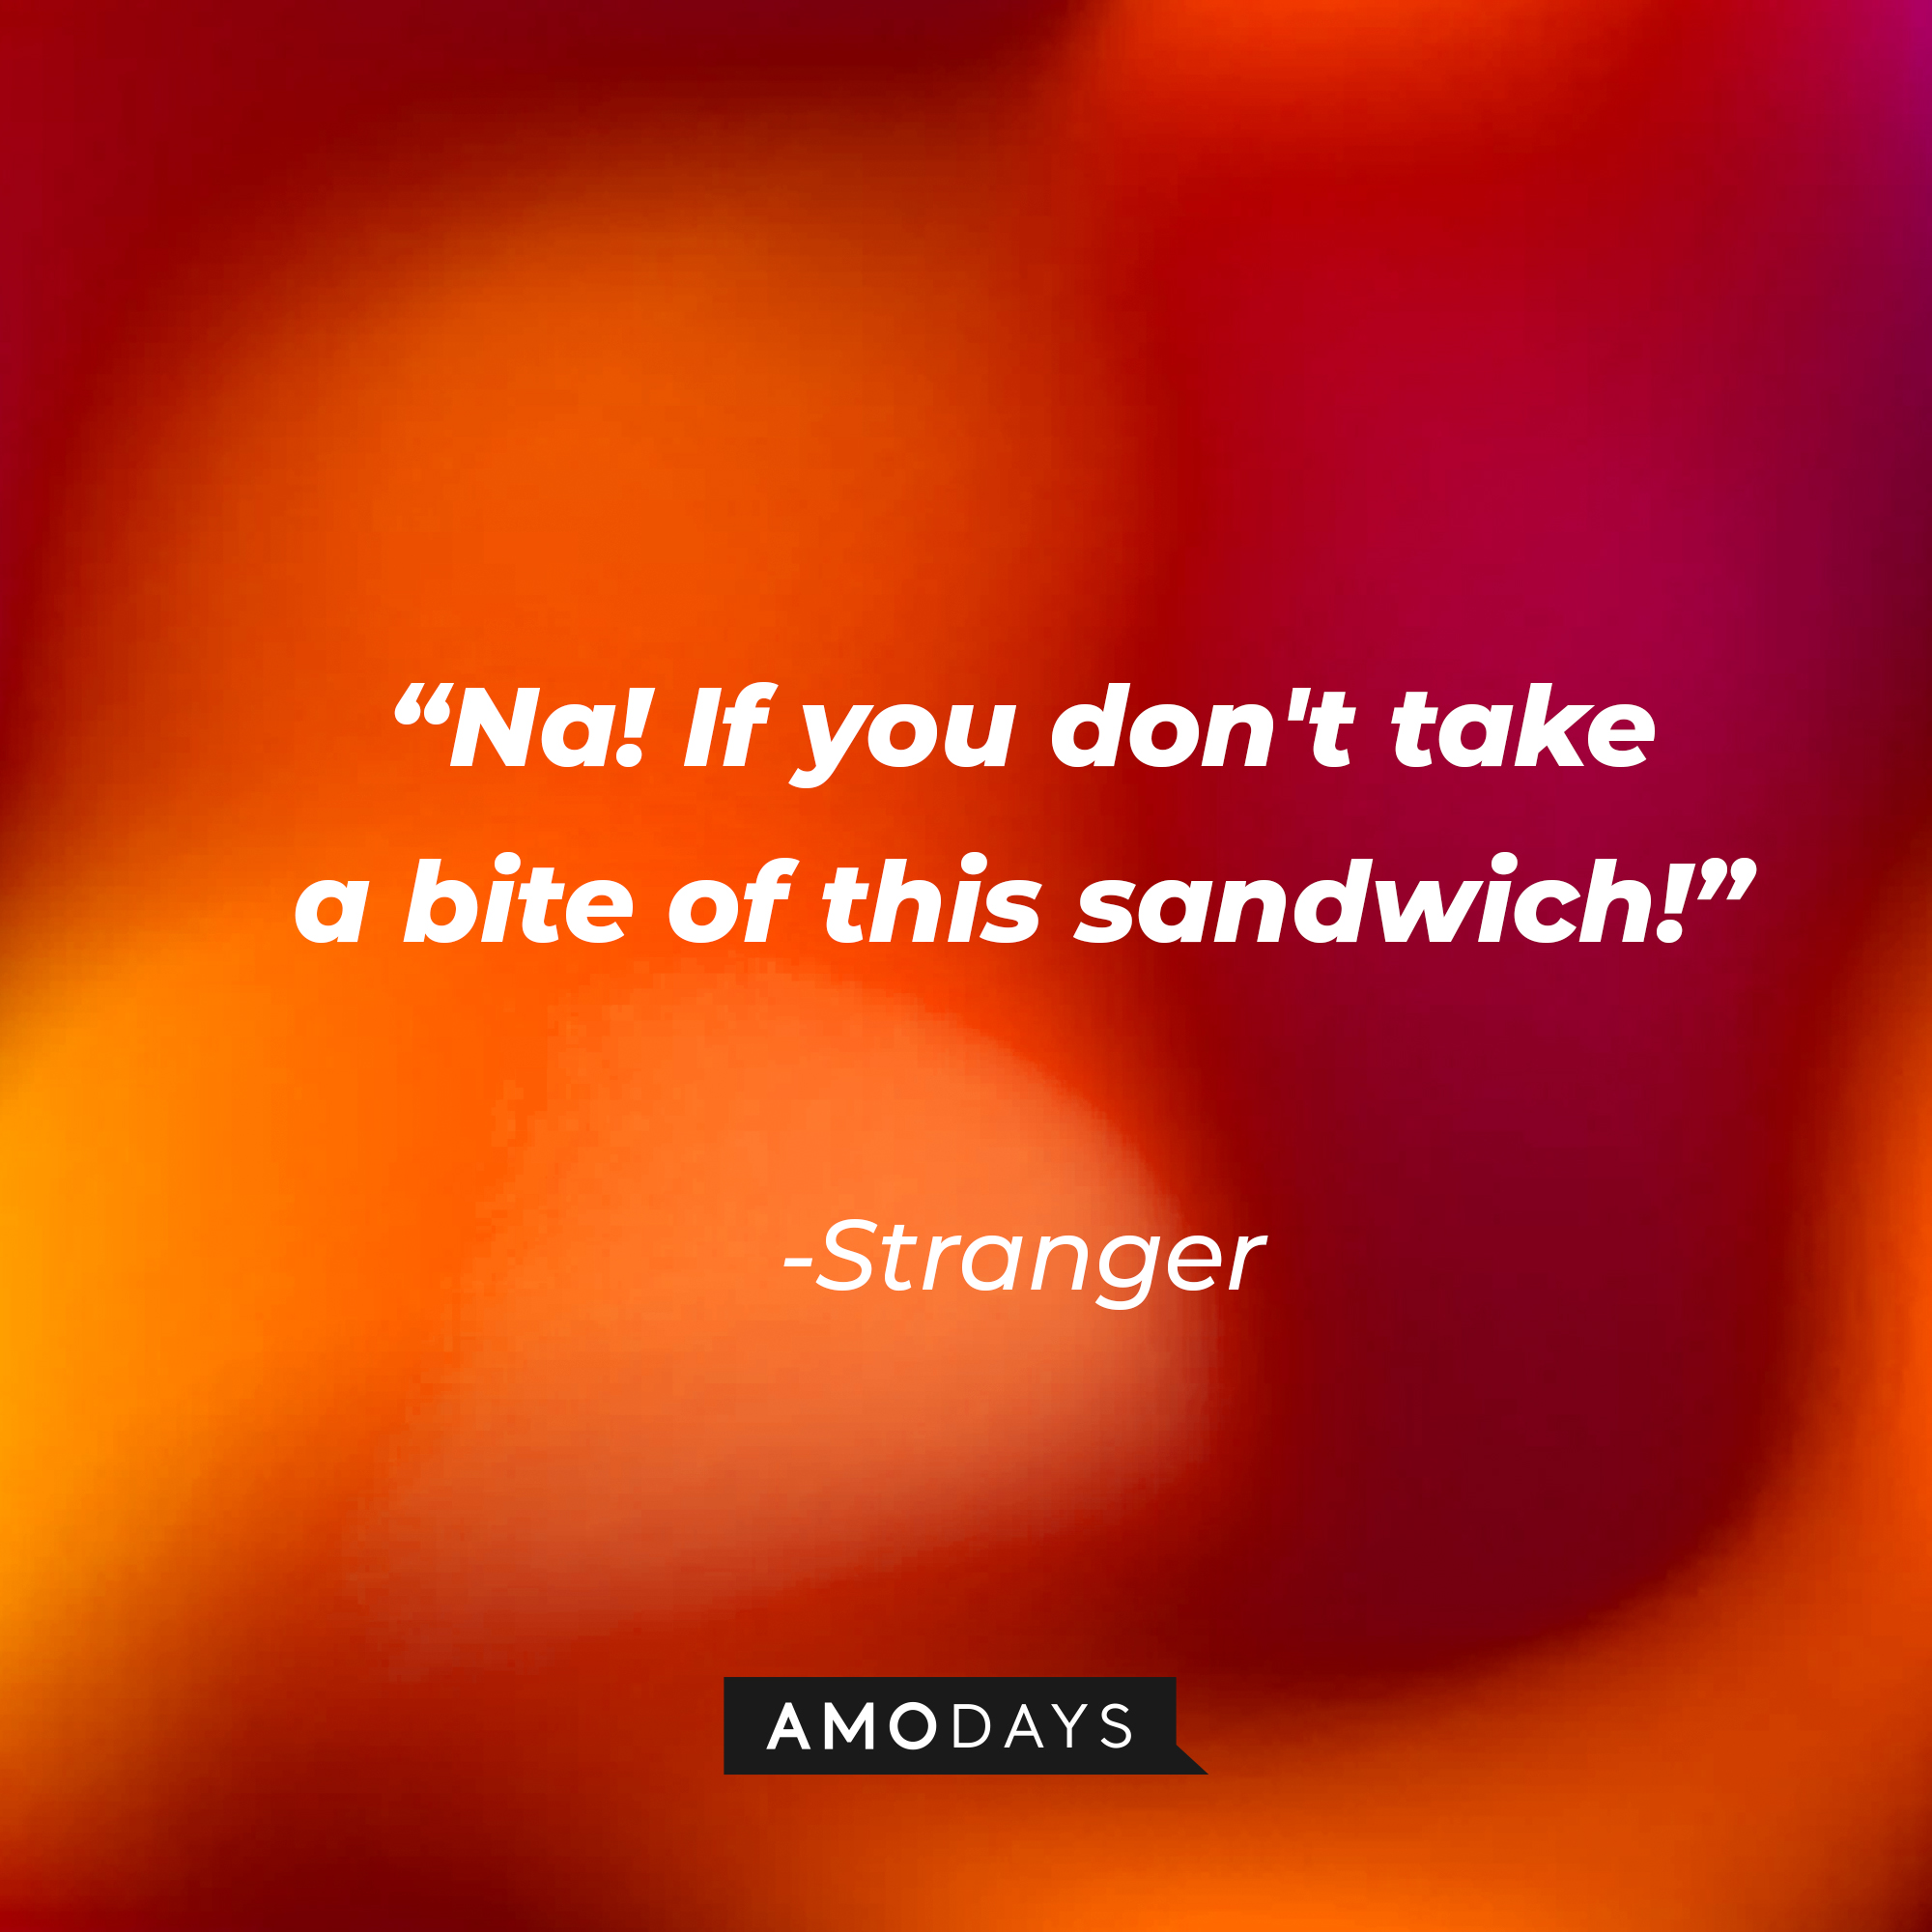 Stranger’s quote: “Na! If you don't take a bite of this sandwich!” | Source: AmoDays